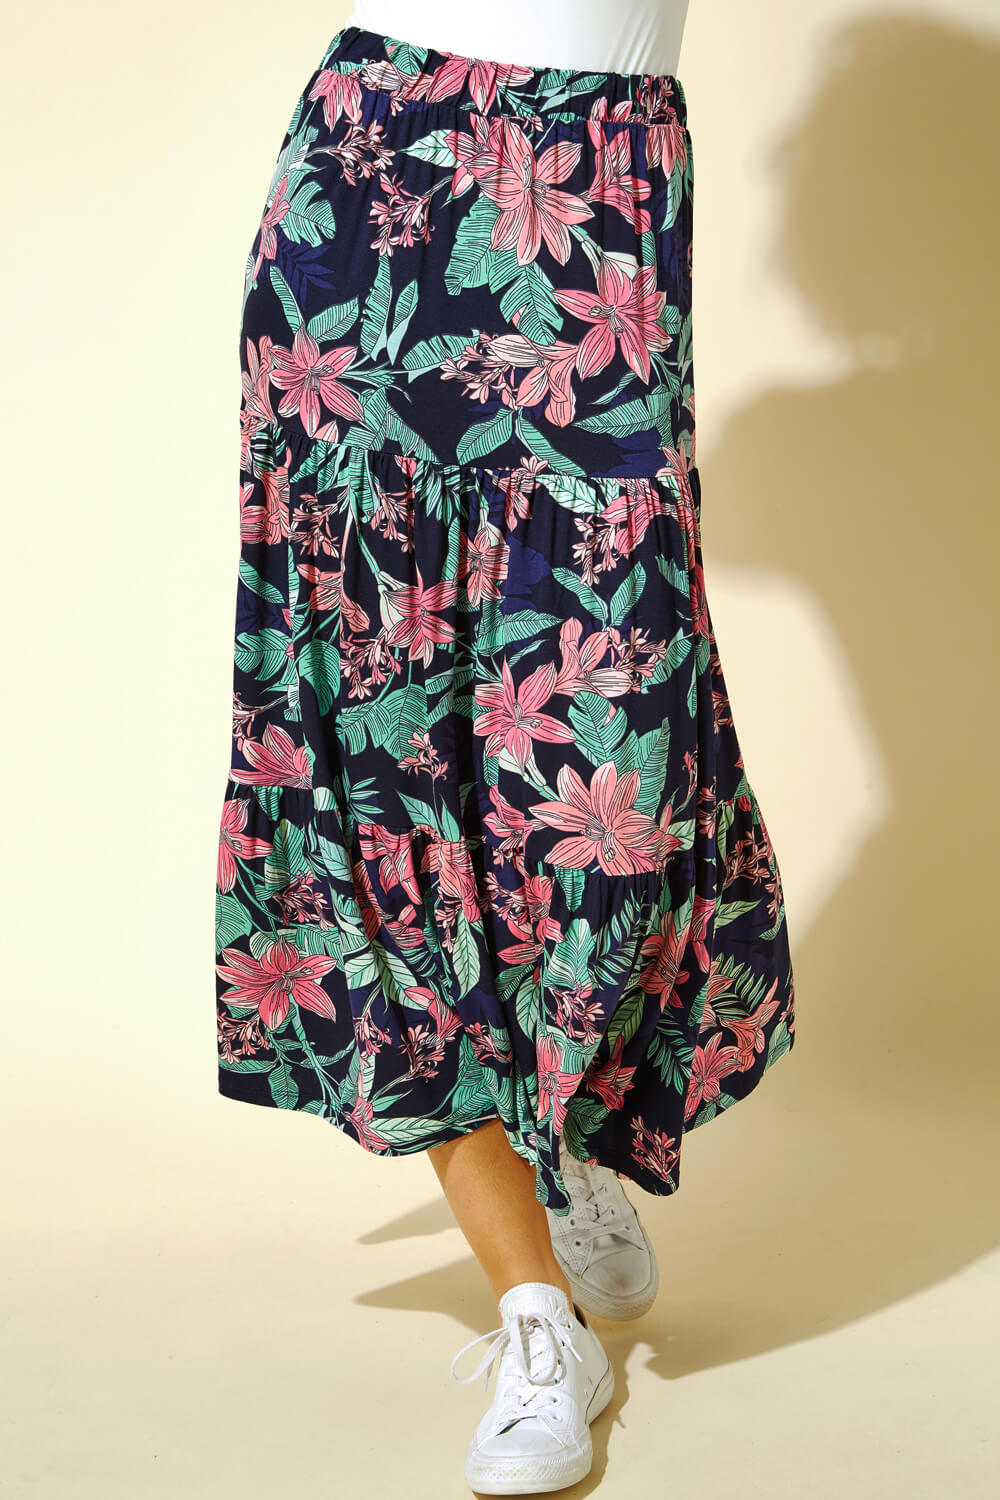 Roman Originals Tropical Floral Tiered Midi Skirt in Navy